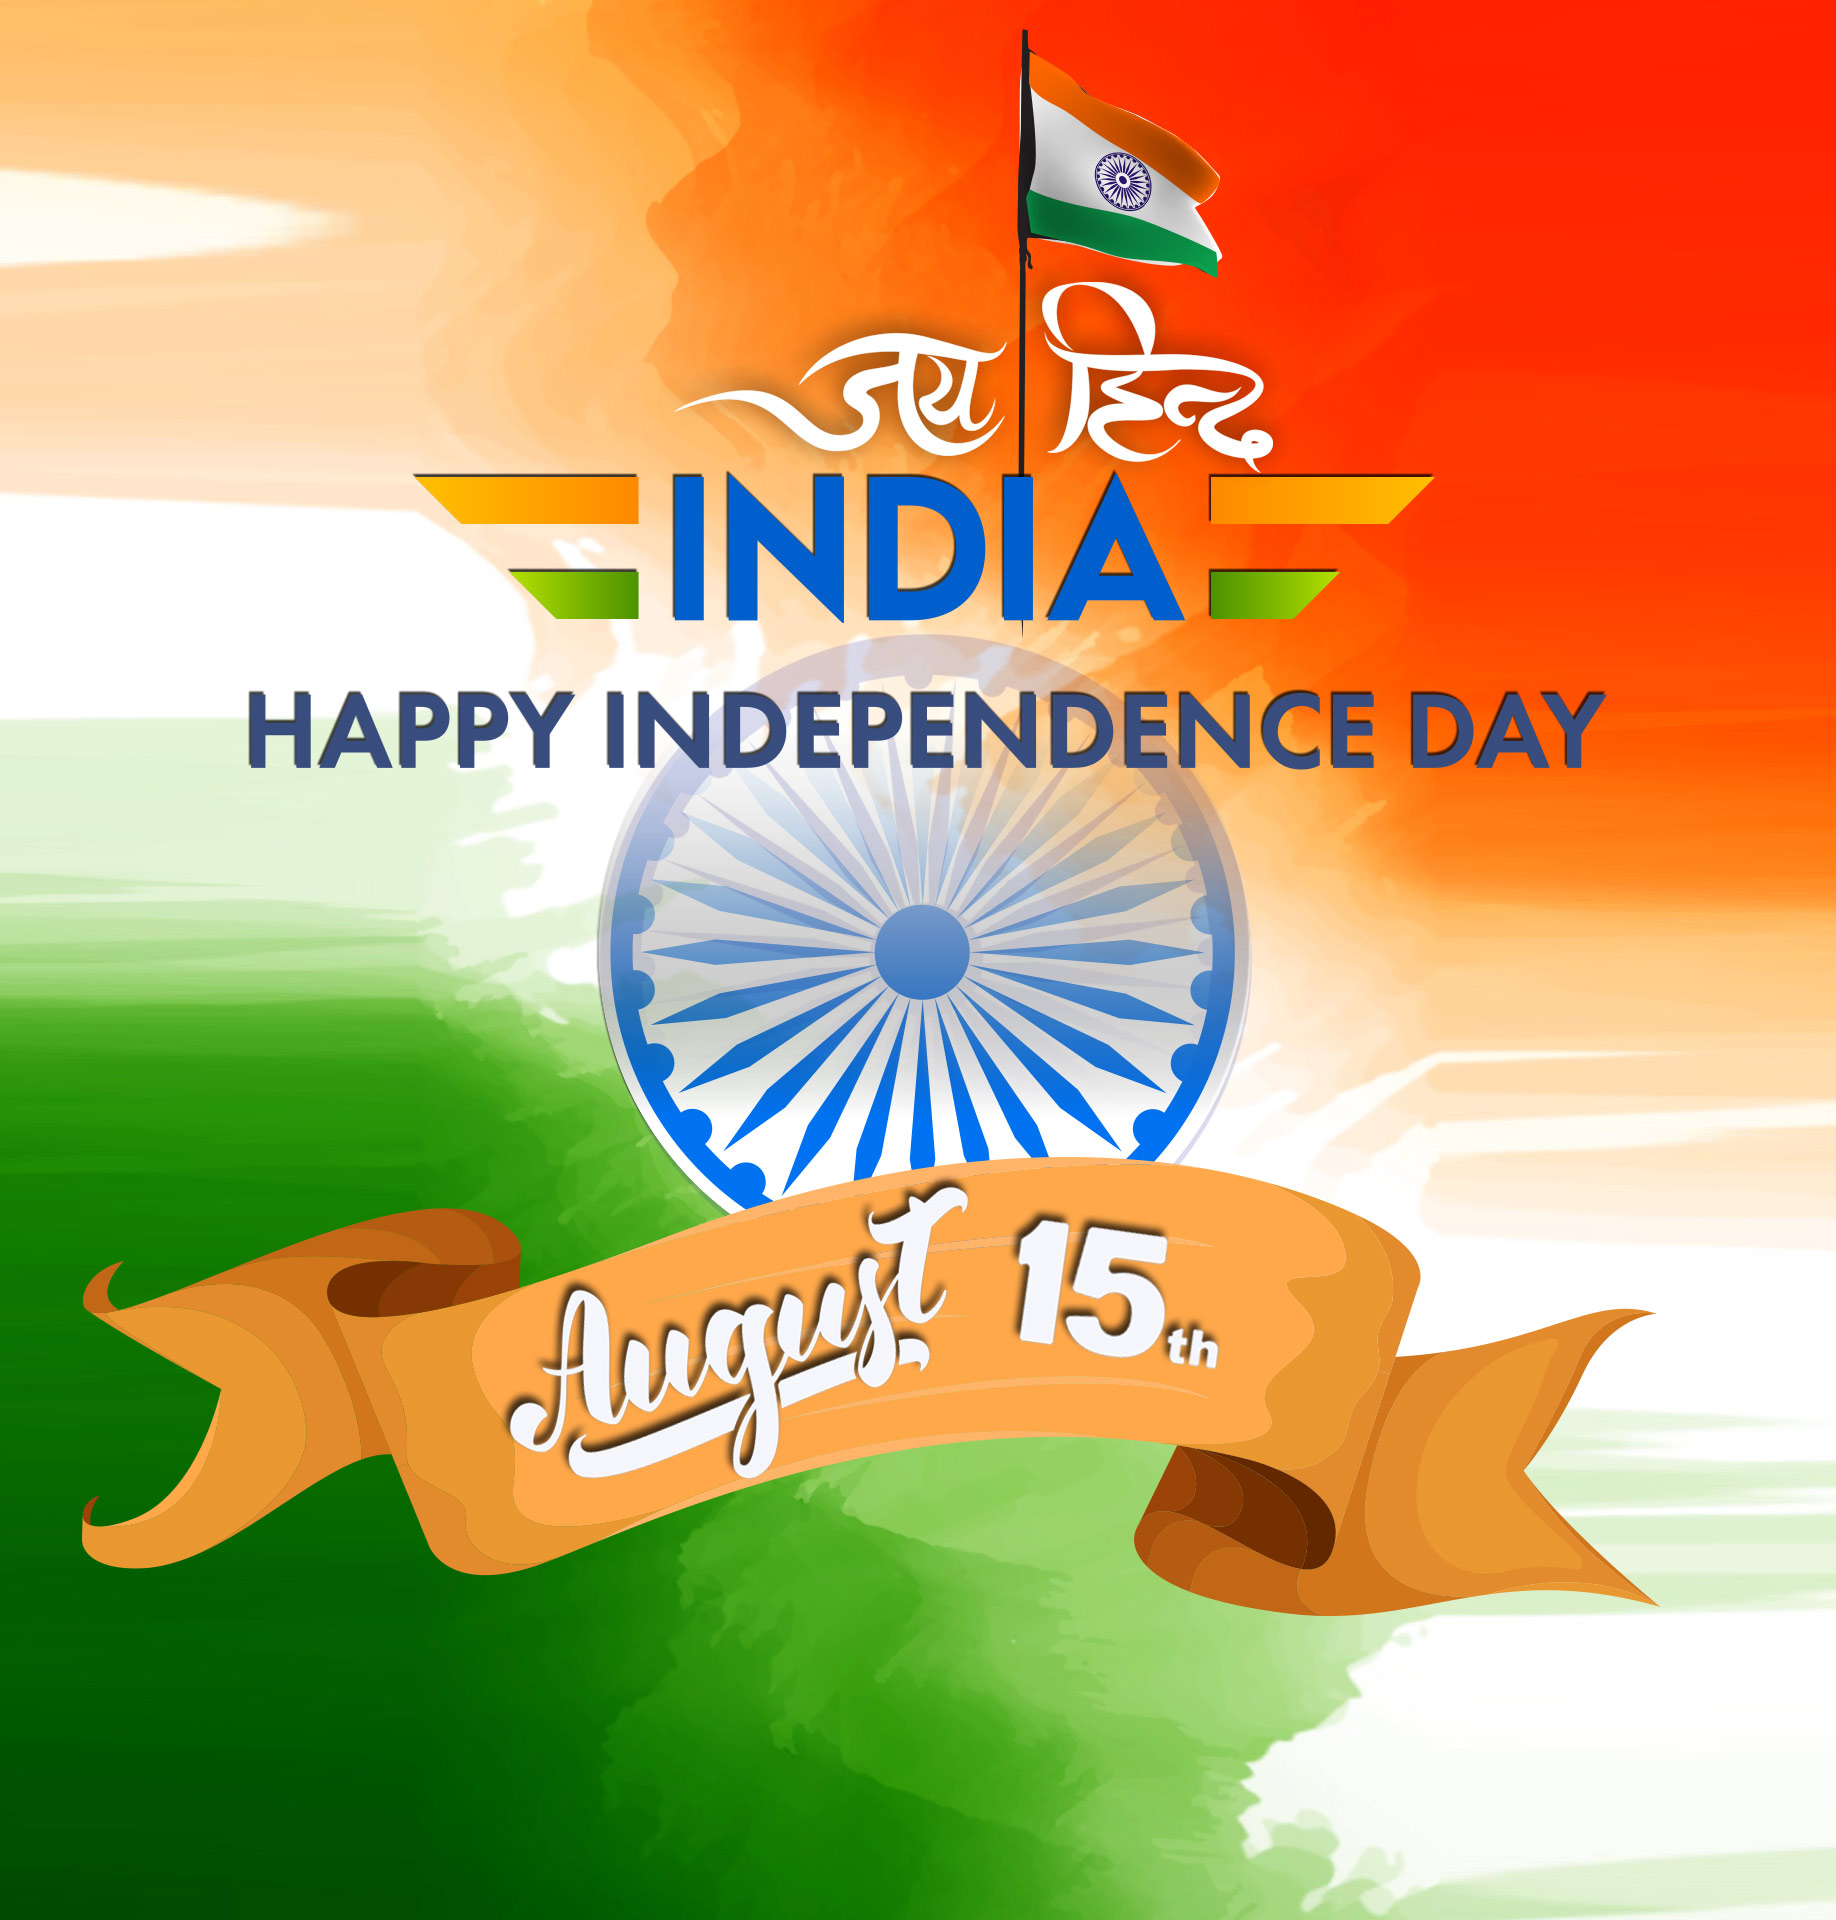 Full HD Happy independence day images and HD wallpapers, greetings, wishes and status